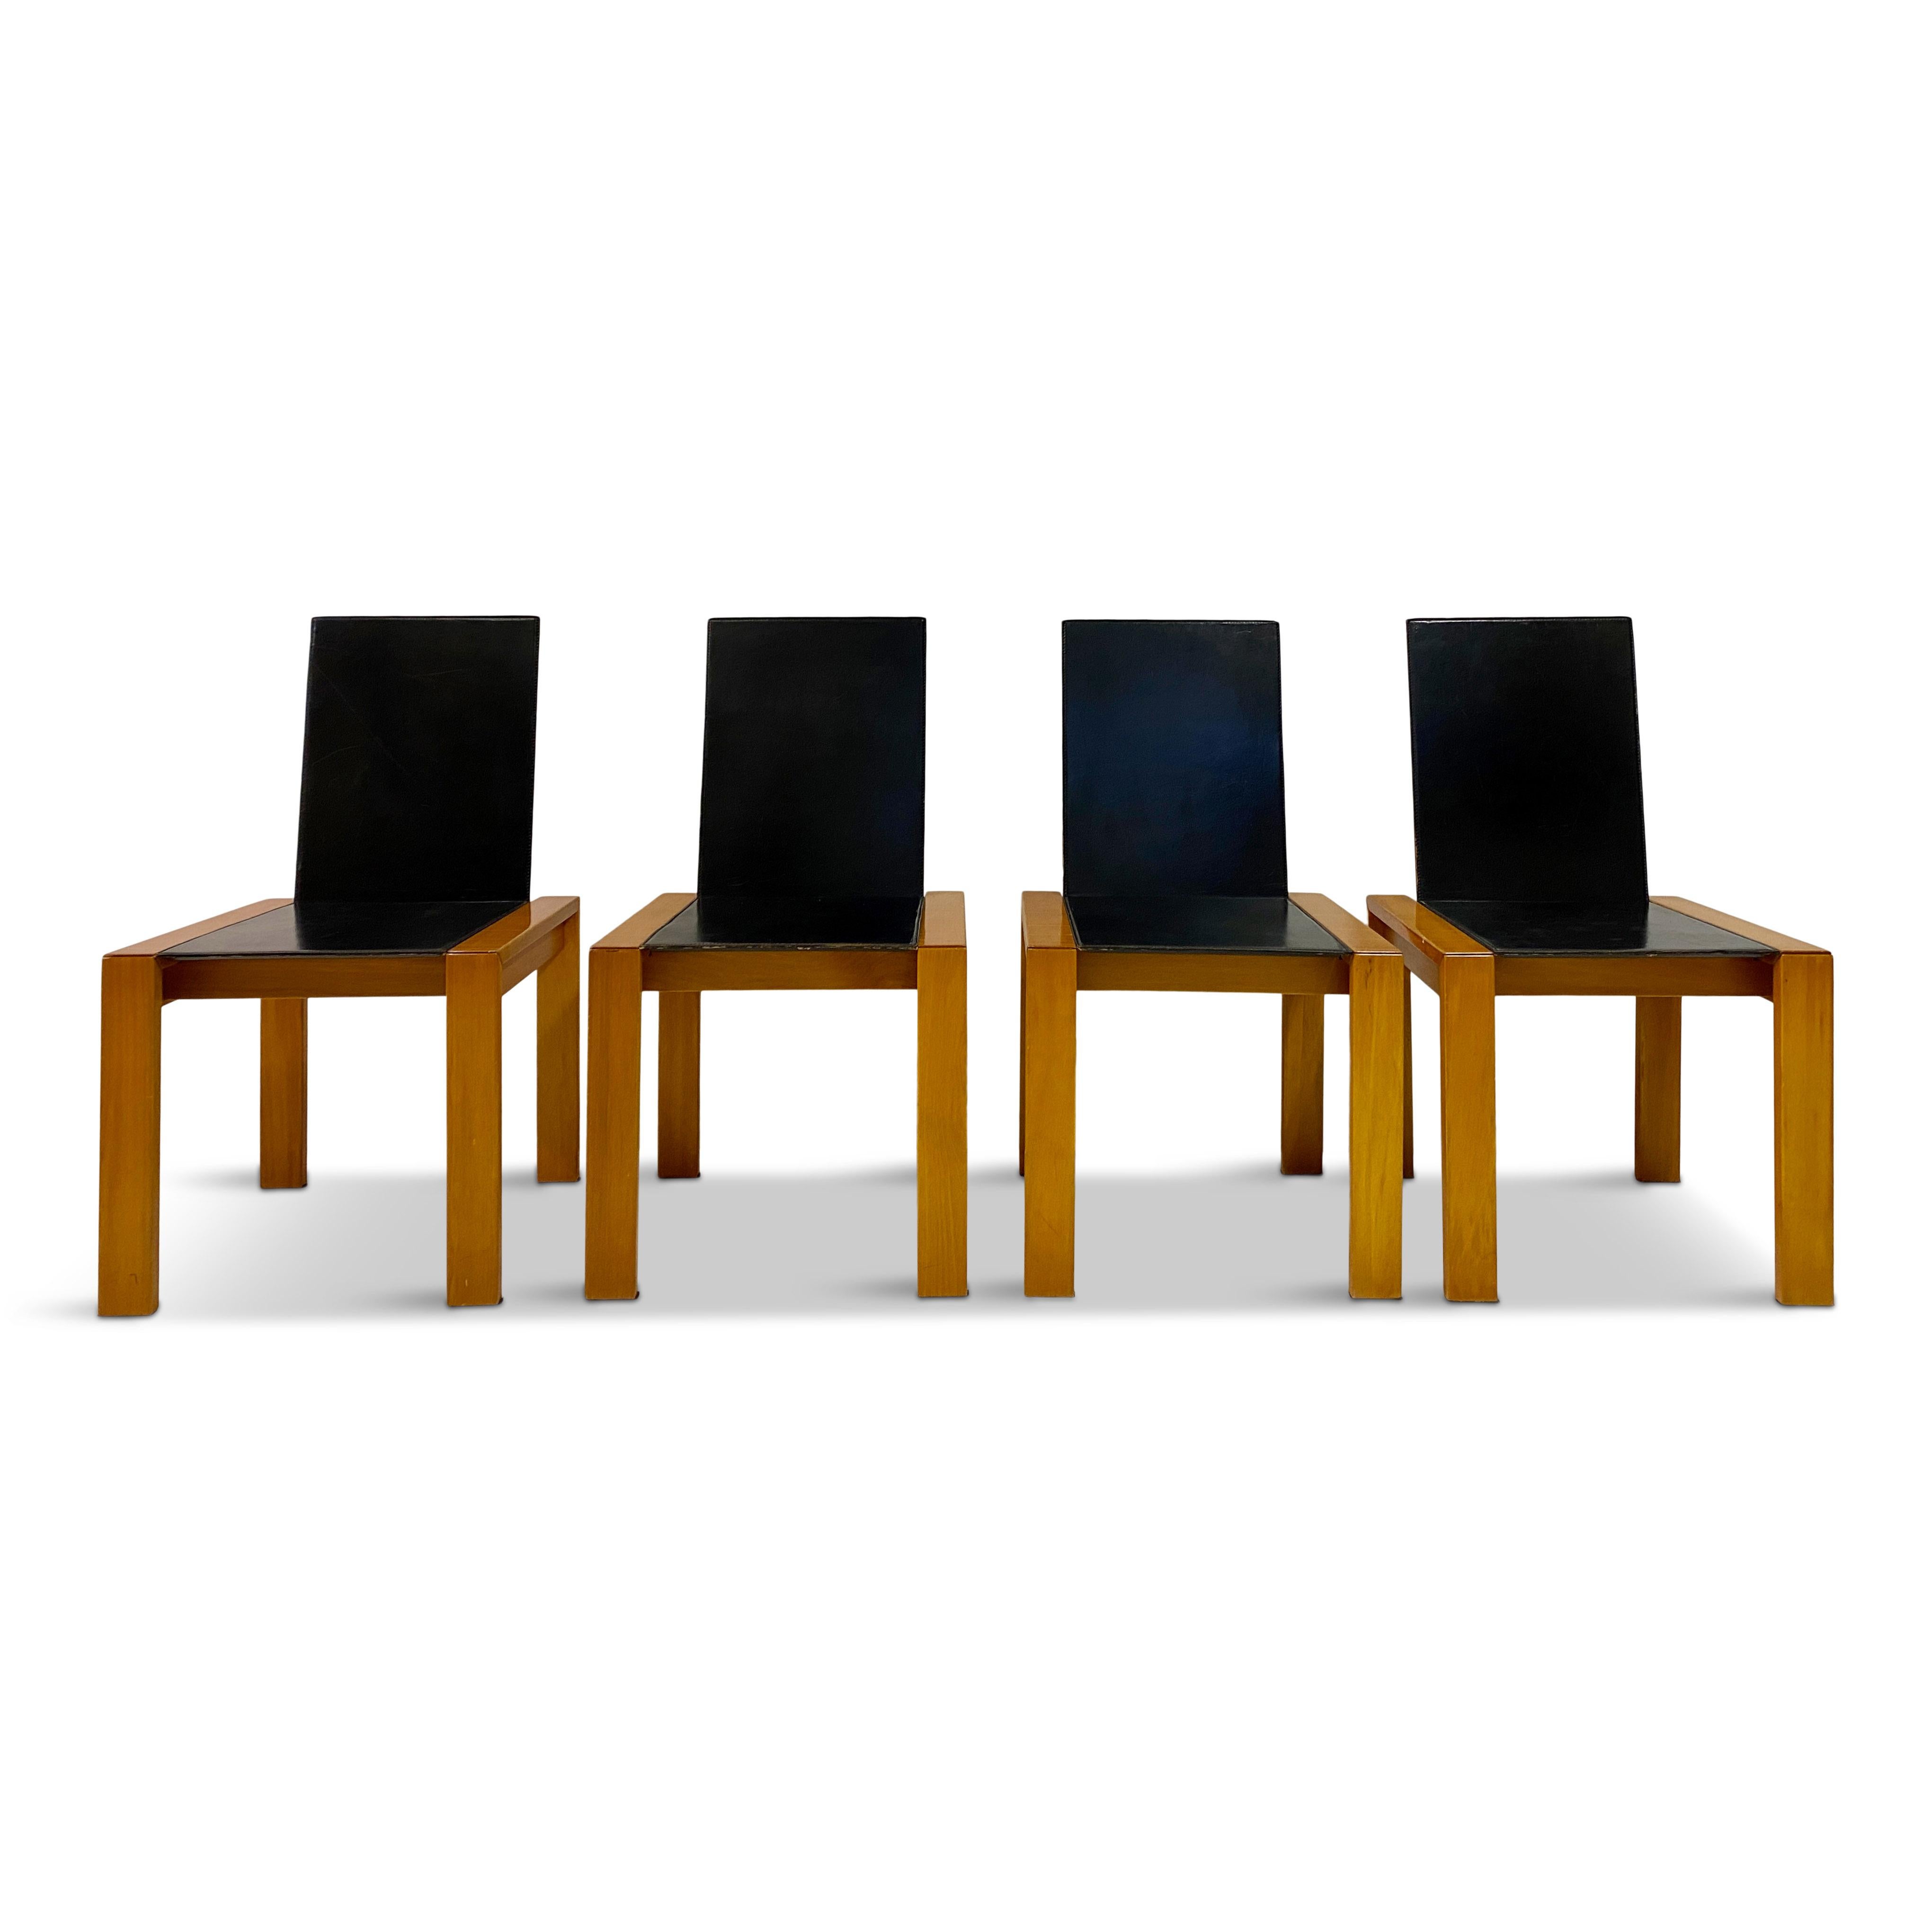 Four dining chairs

Wood frame

Leather seat and back

Seat height 44cm

Italy, 1970s.